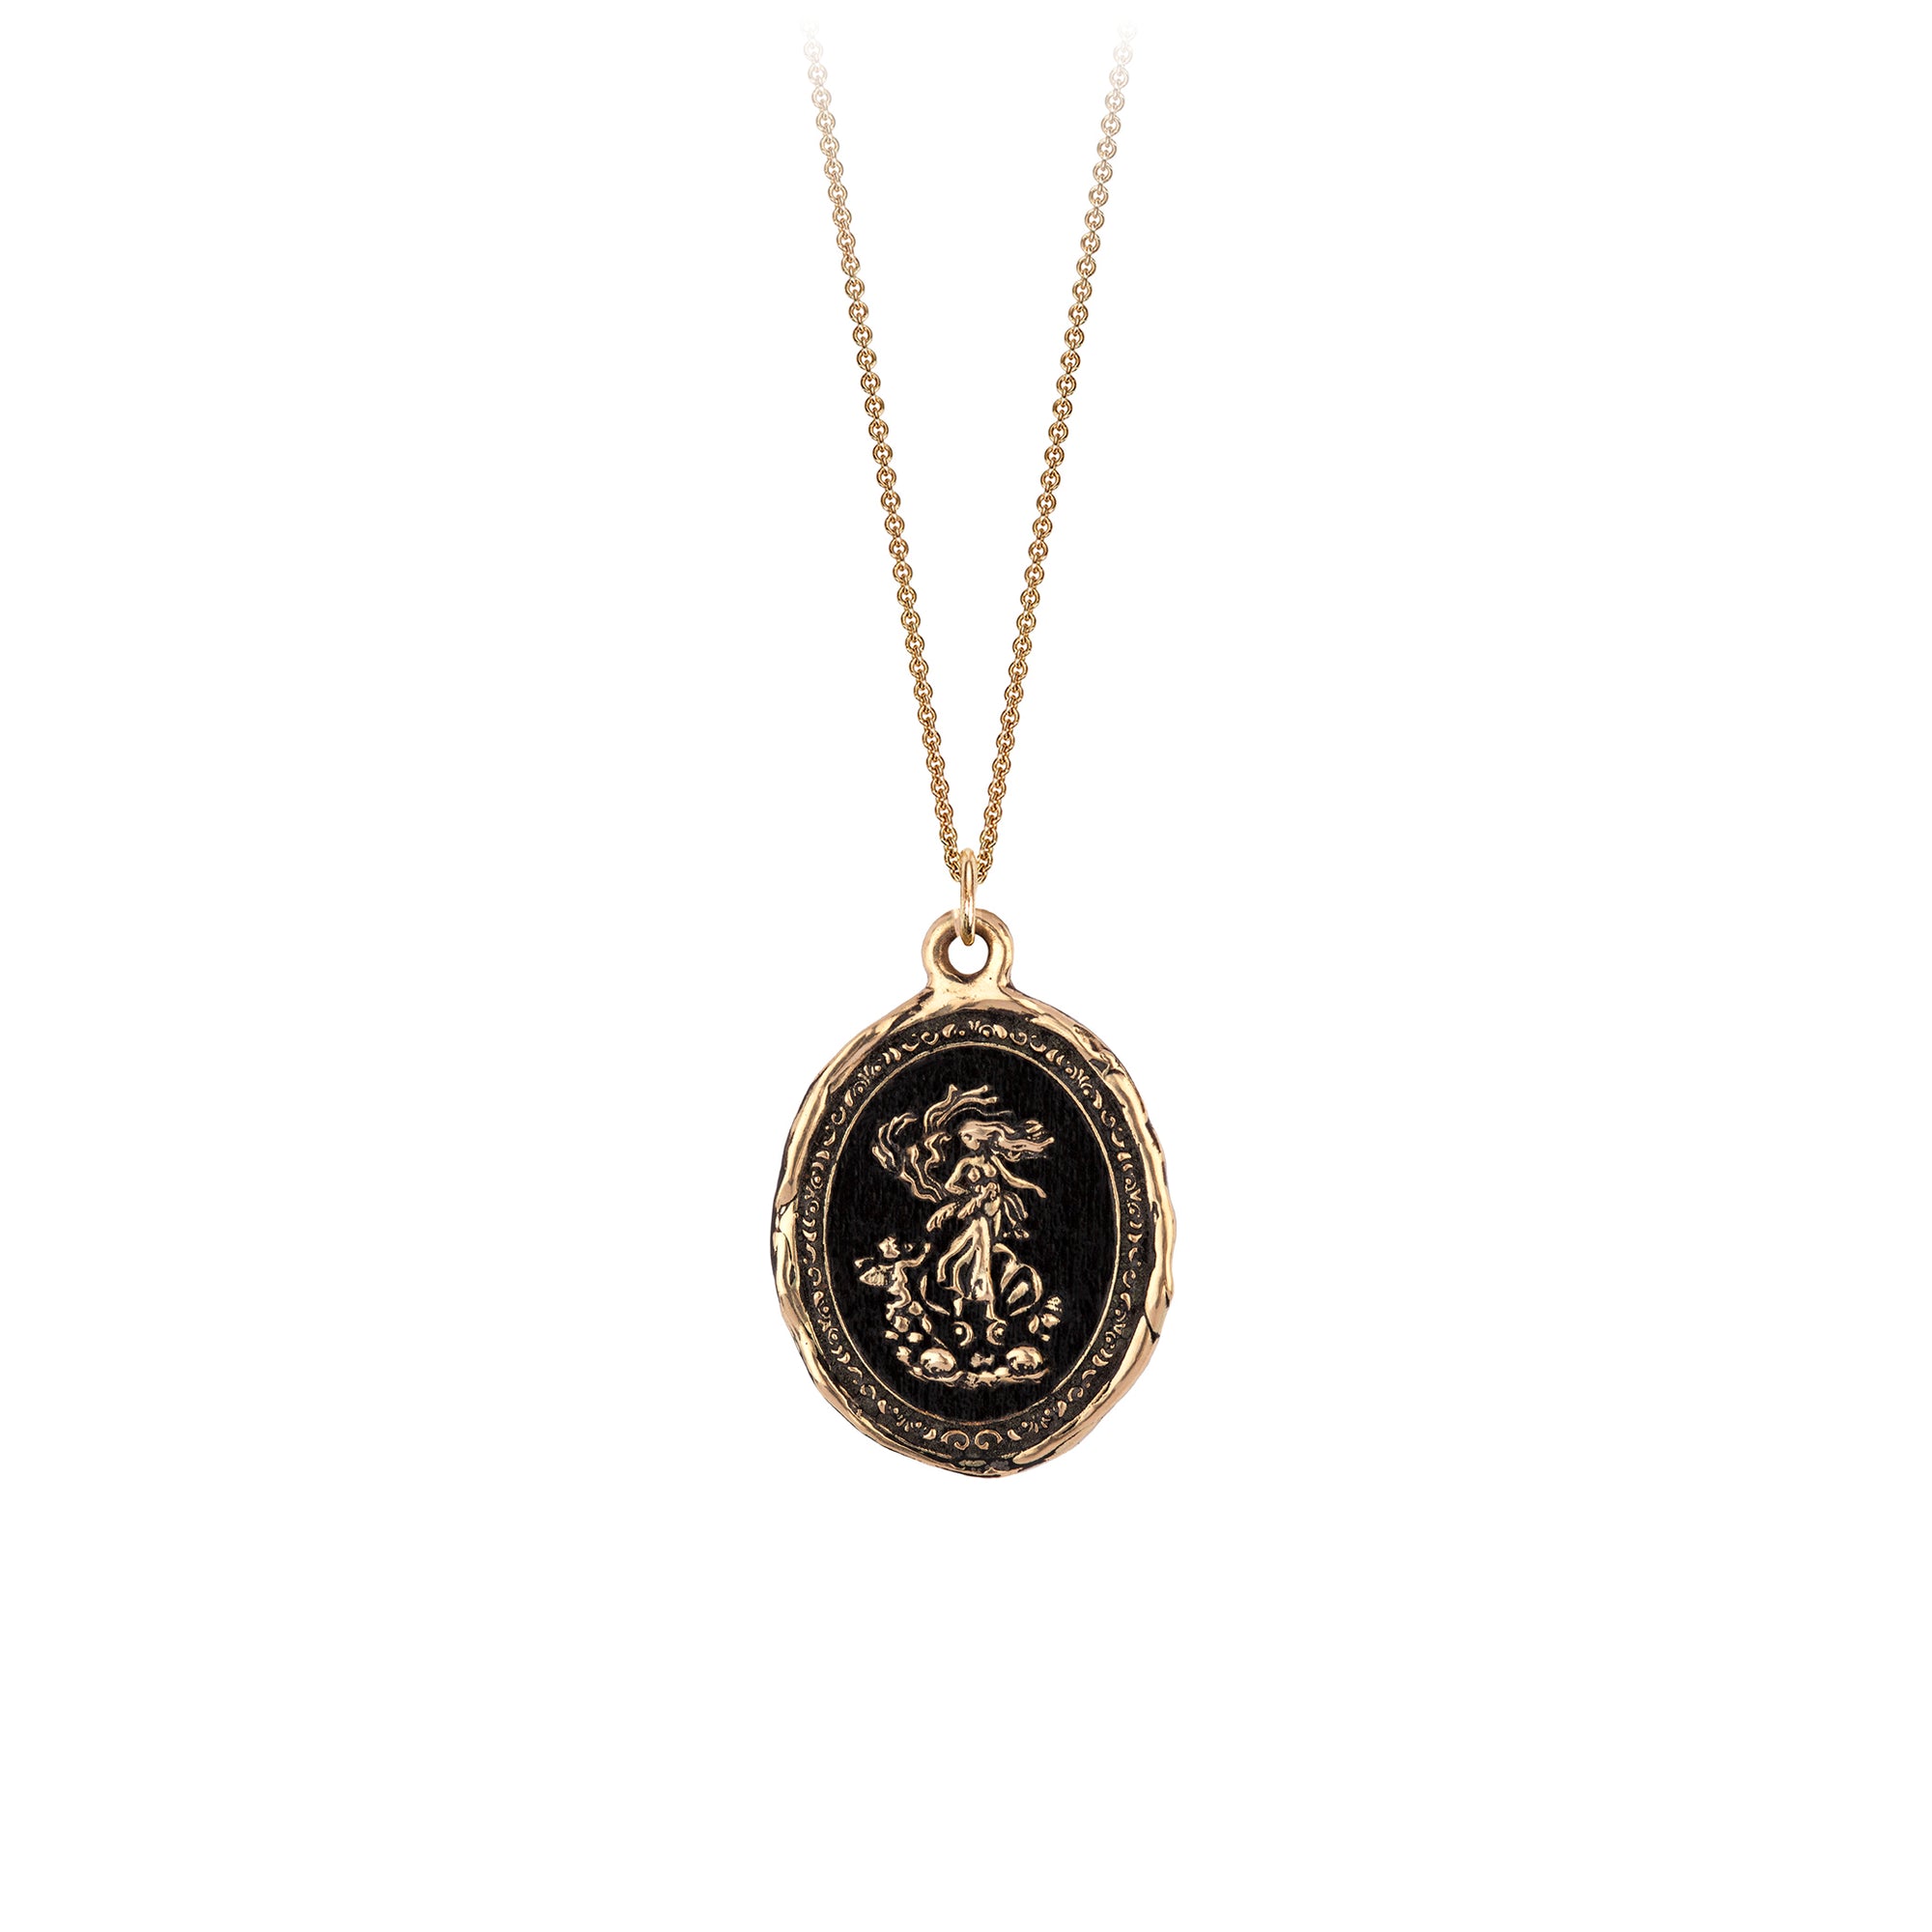 A 14k gold chain featuring our 14k gold Aphrodite goddess talisman.